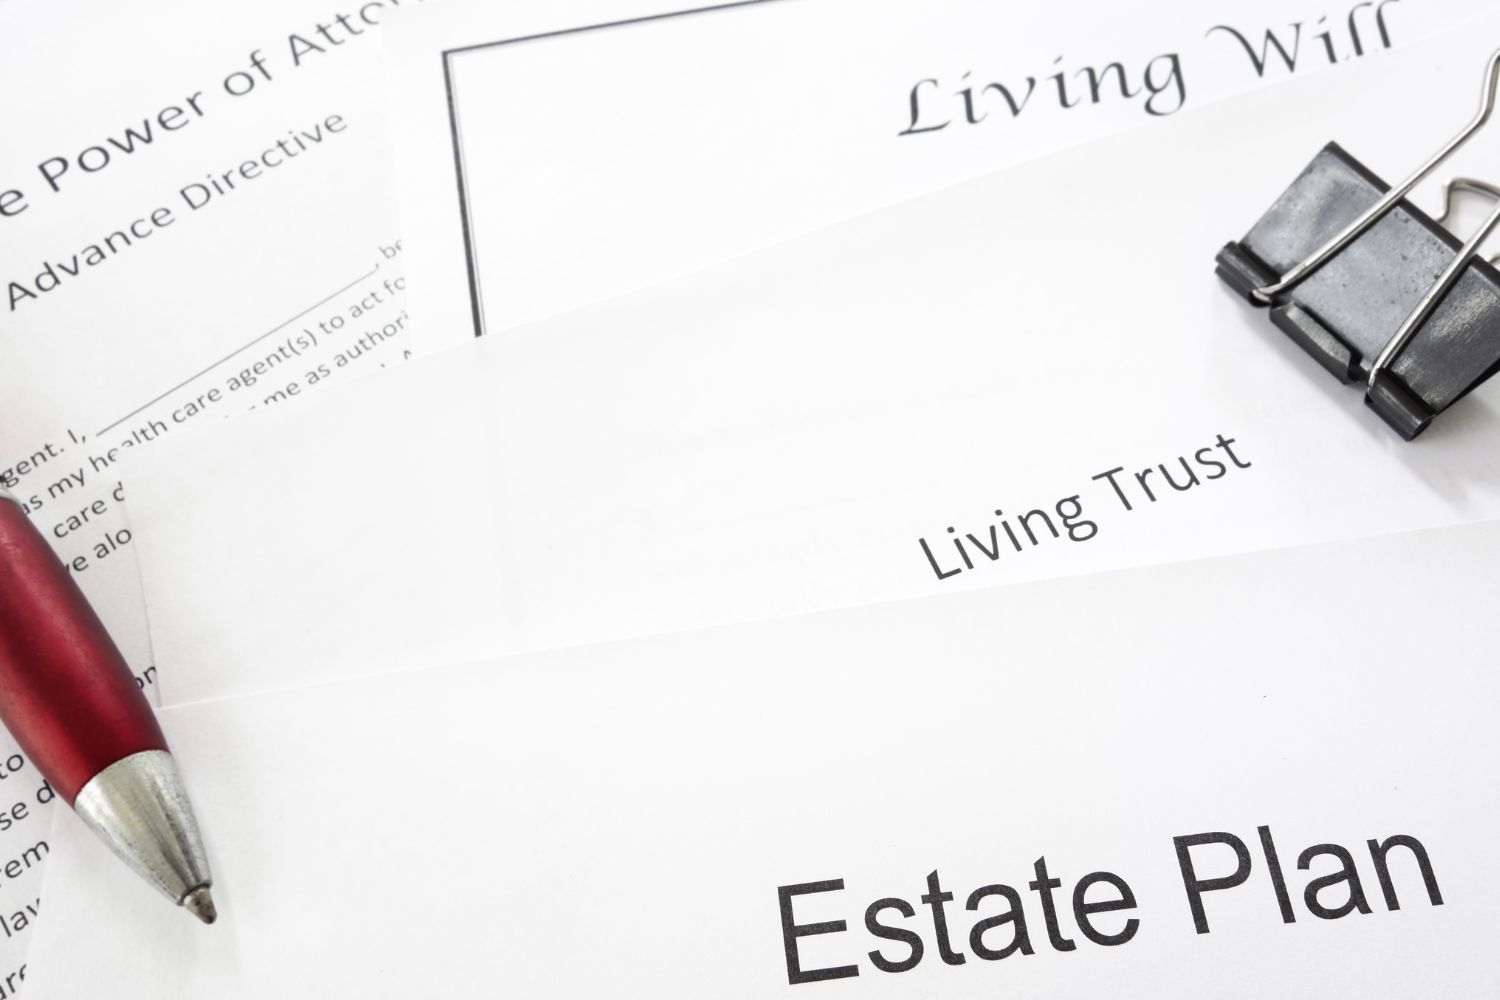 Some things to consider when creating an estate plan